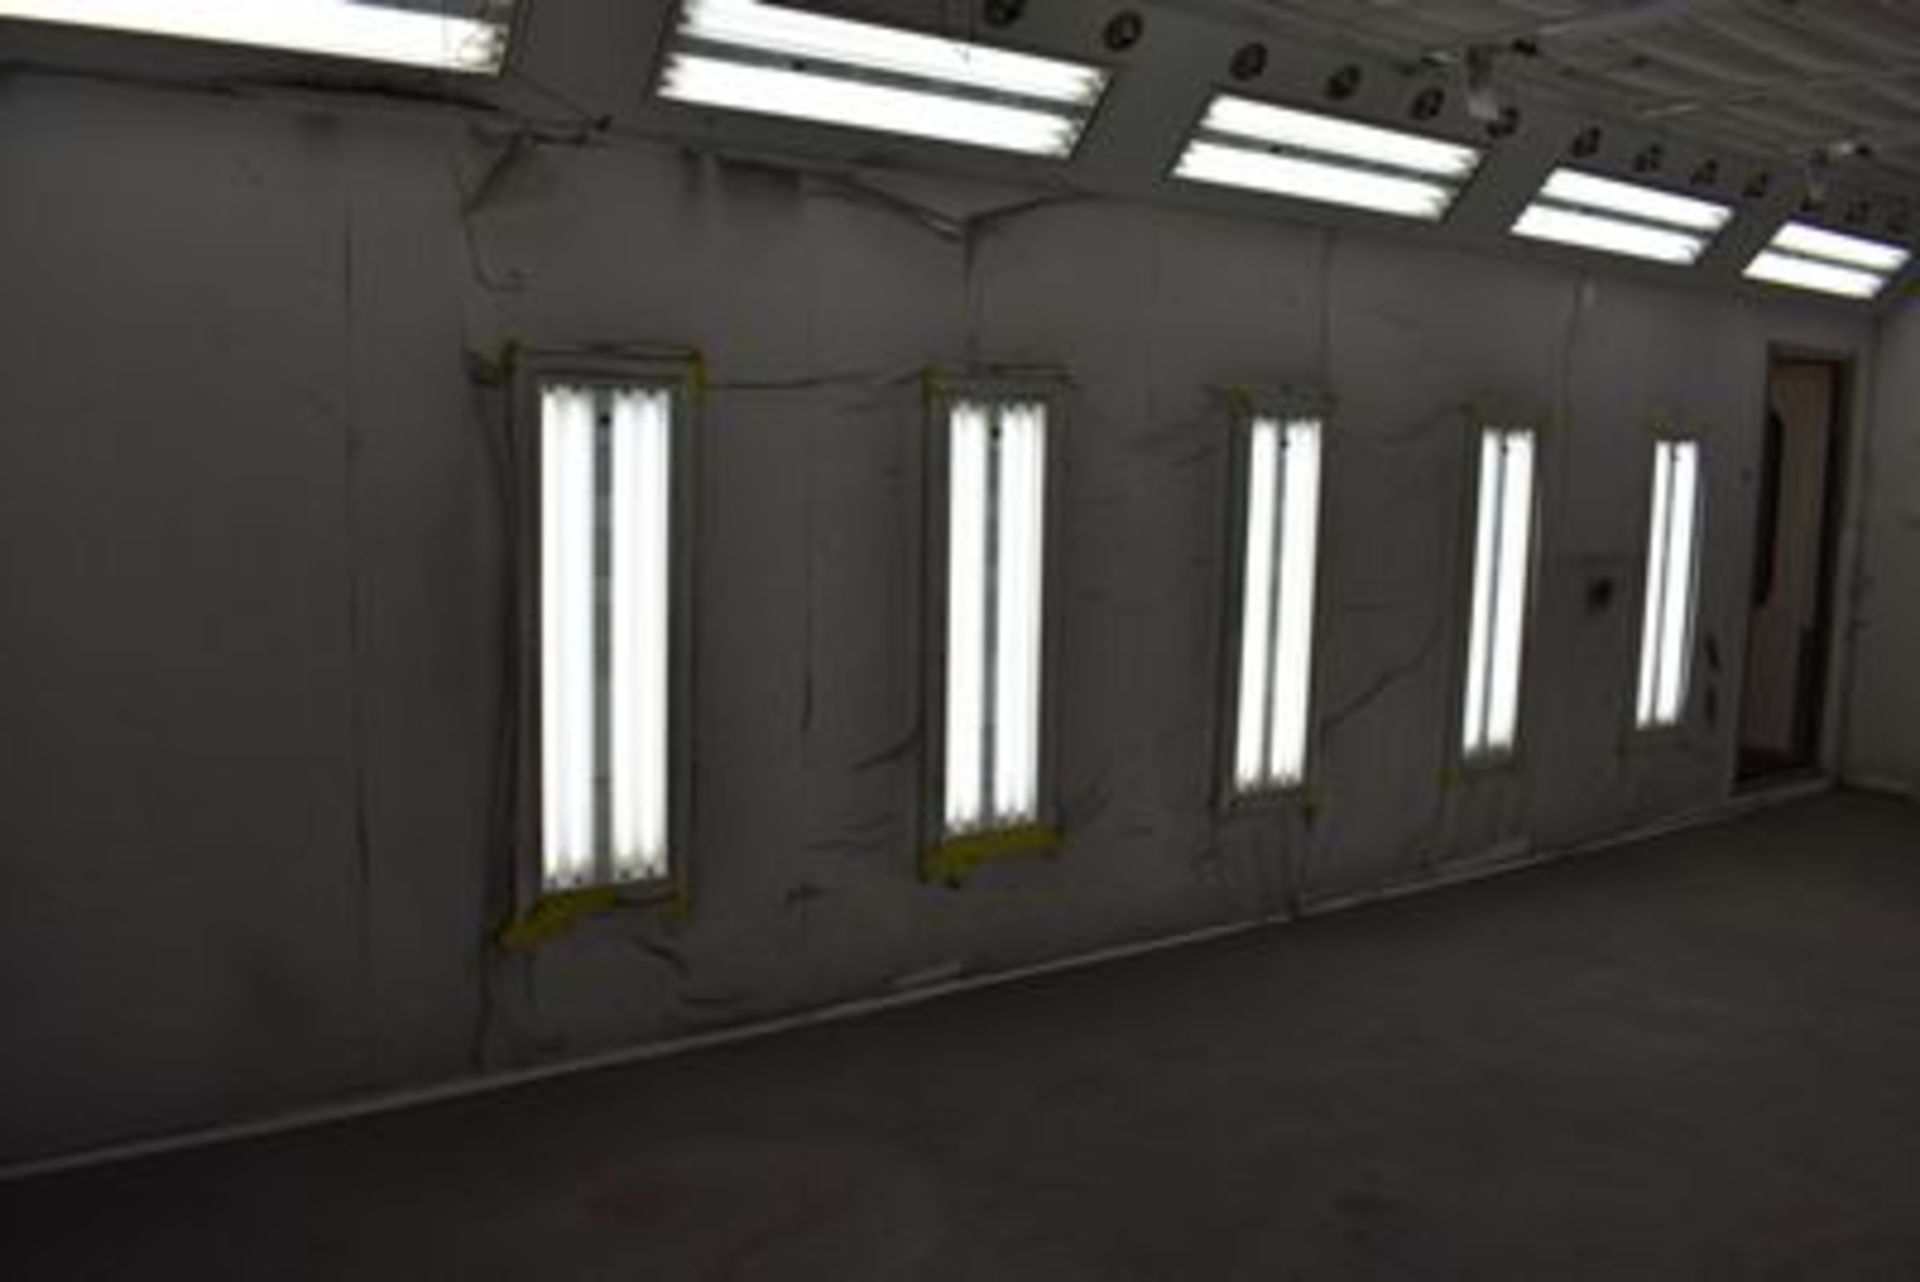 AMERI-CURE INC PAINT BOOTH, 2016, DELAYED REMOVAL: JULY 15, APPROX 22' W X 32' D X 11' TALL - Image 18 of 20